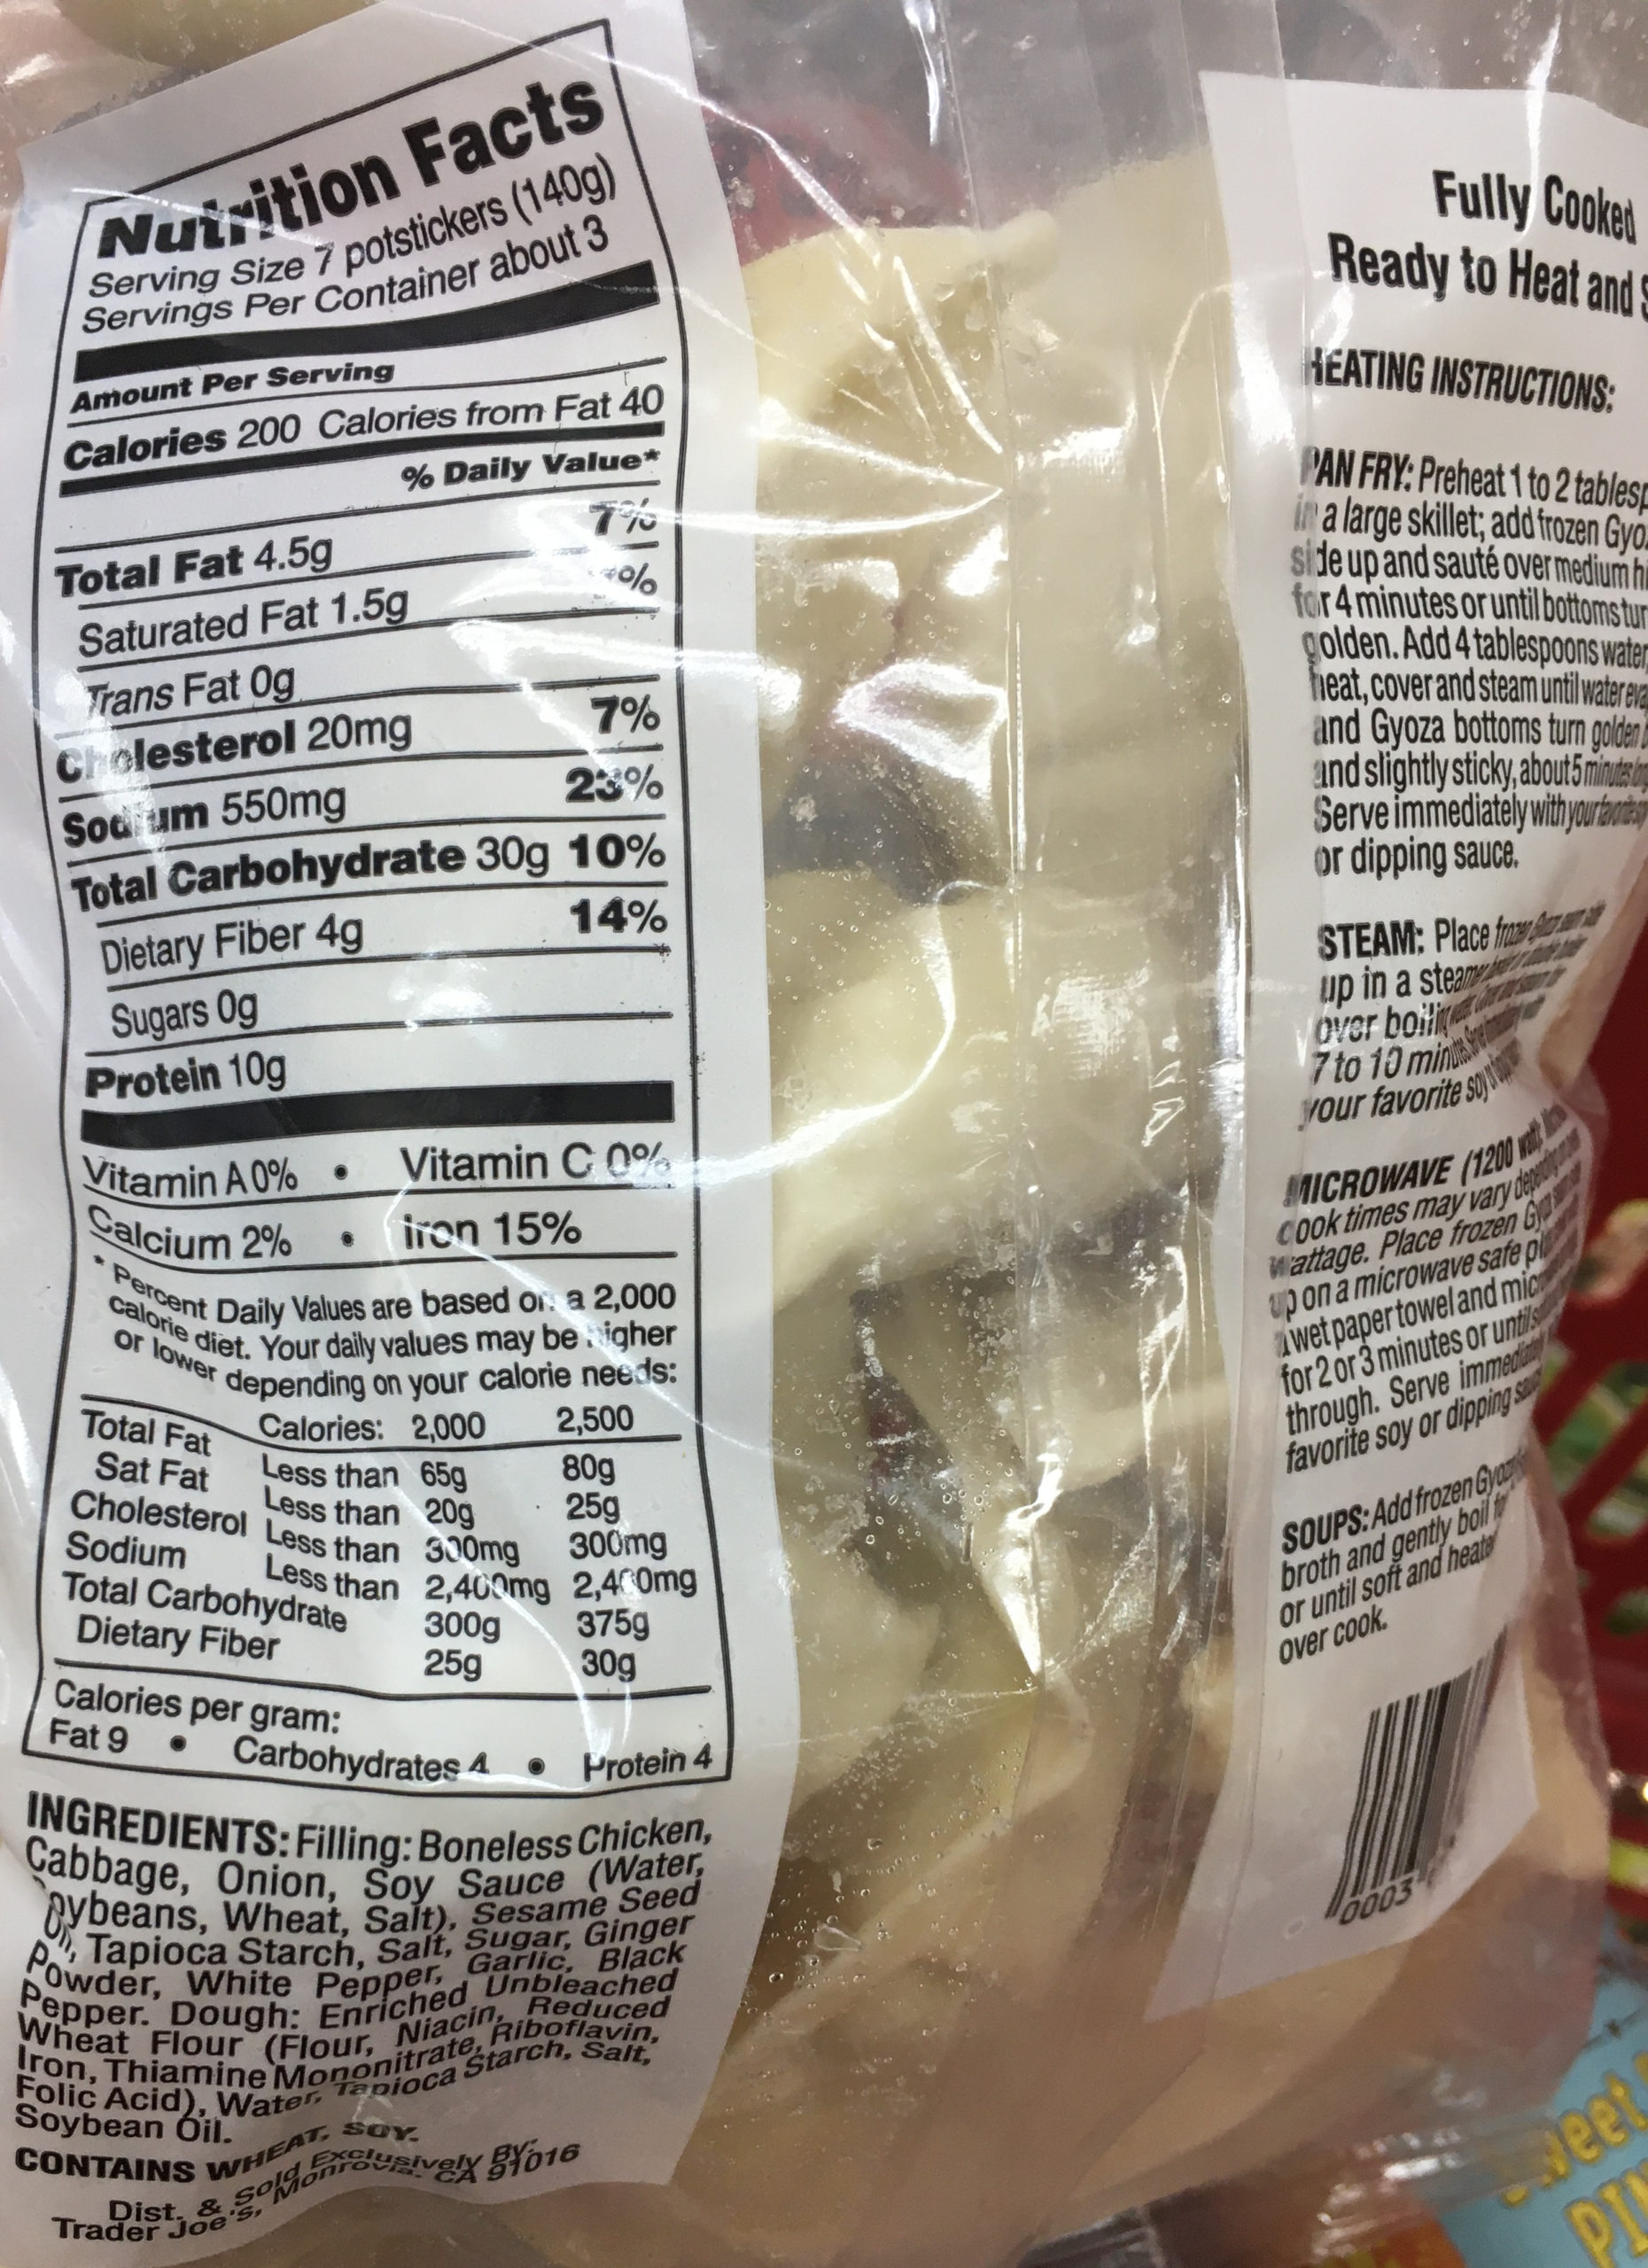 https://www.traderjoesgroceryreviews.com/wp-content/uploads/2021/07/trader-joes-potstickers-directions-nutrition-scaled.jpg